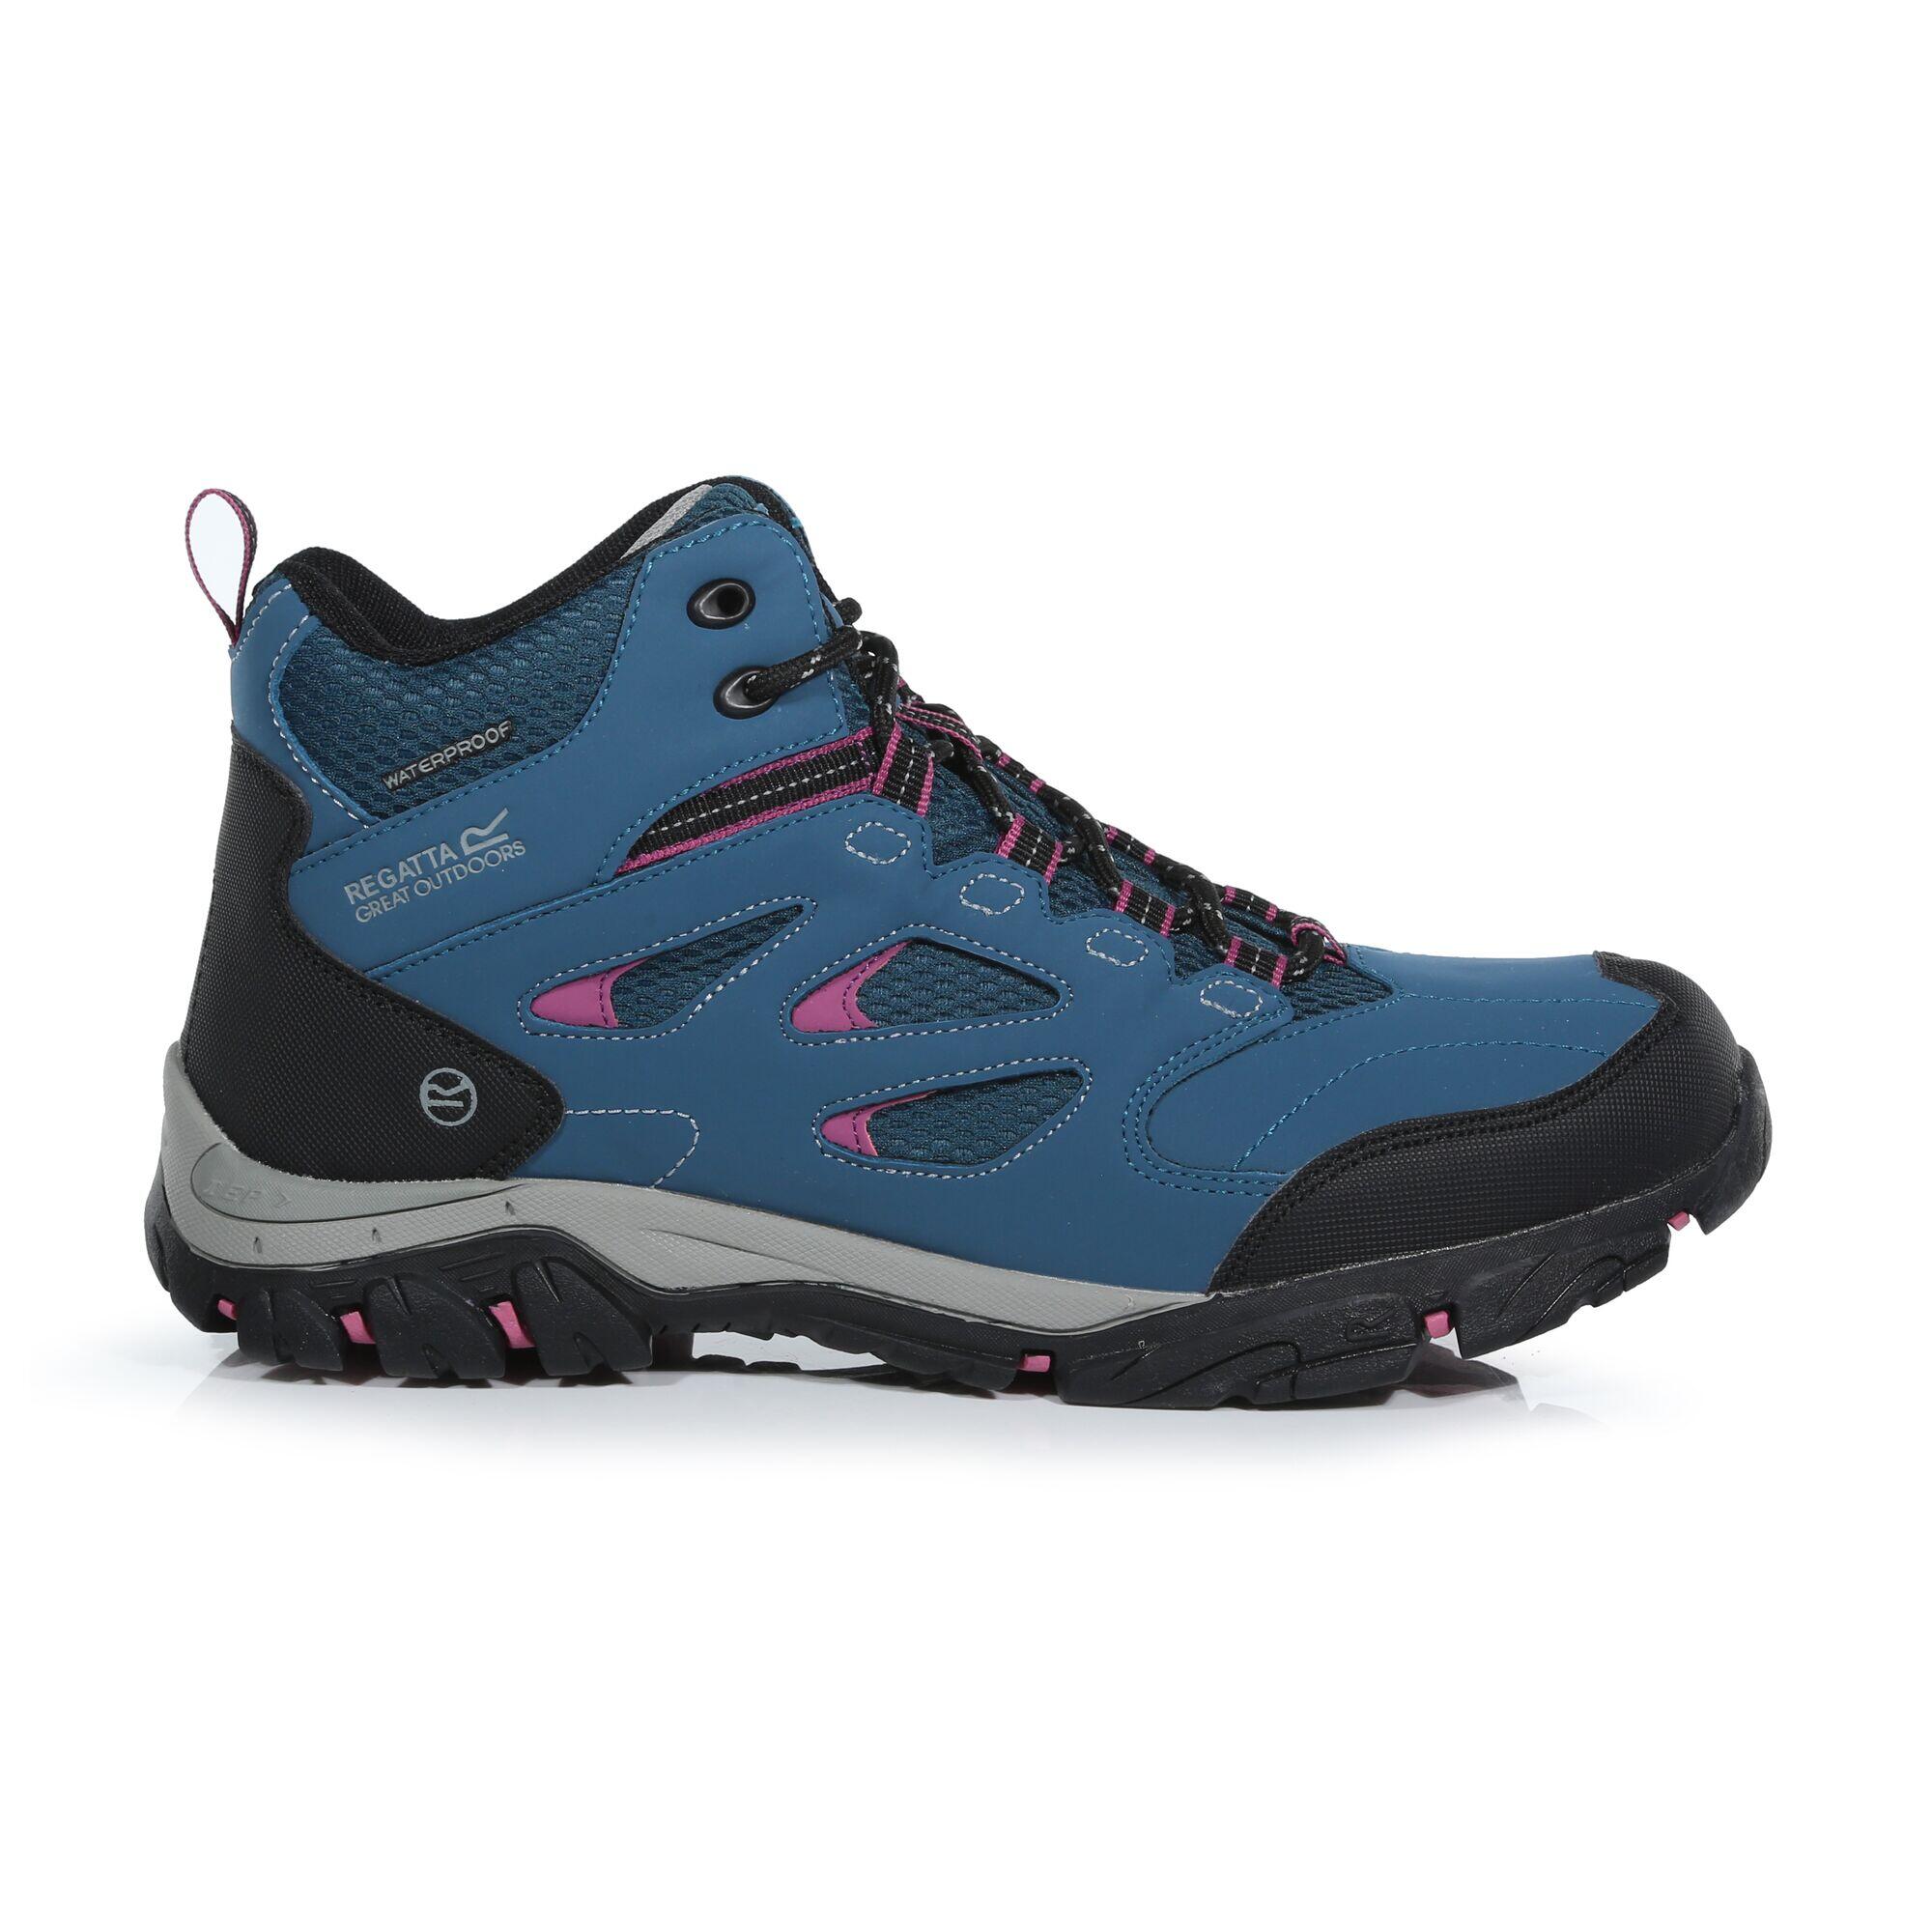 Lady Holcombe IEP Mid Women's Hiking Boots - Moroccan Blue / Red 1/5